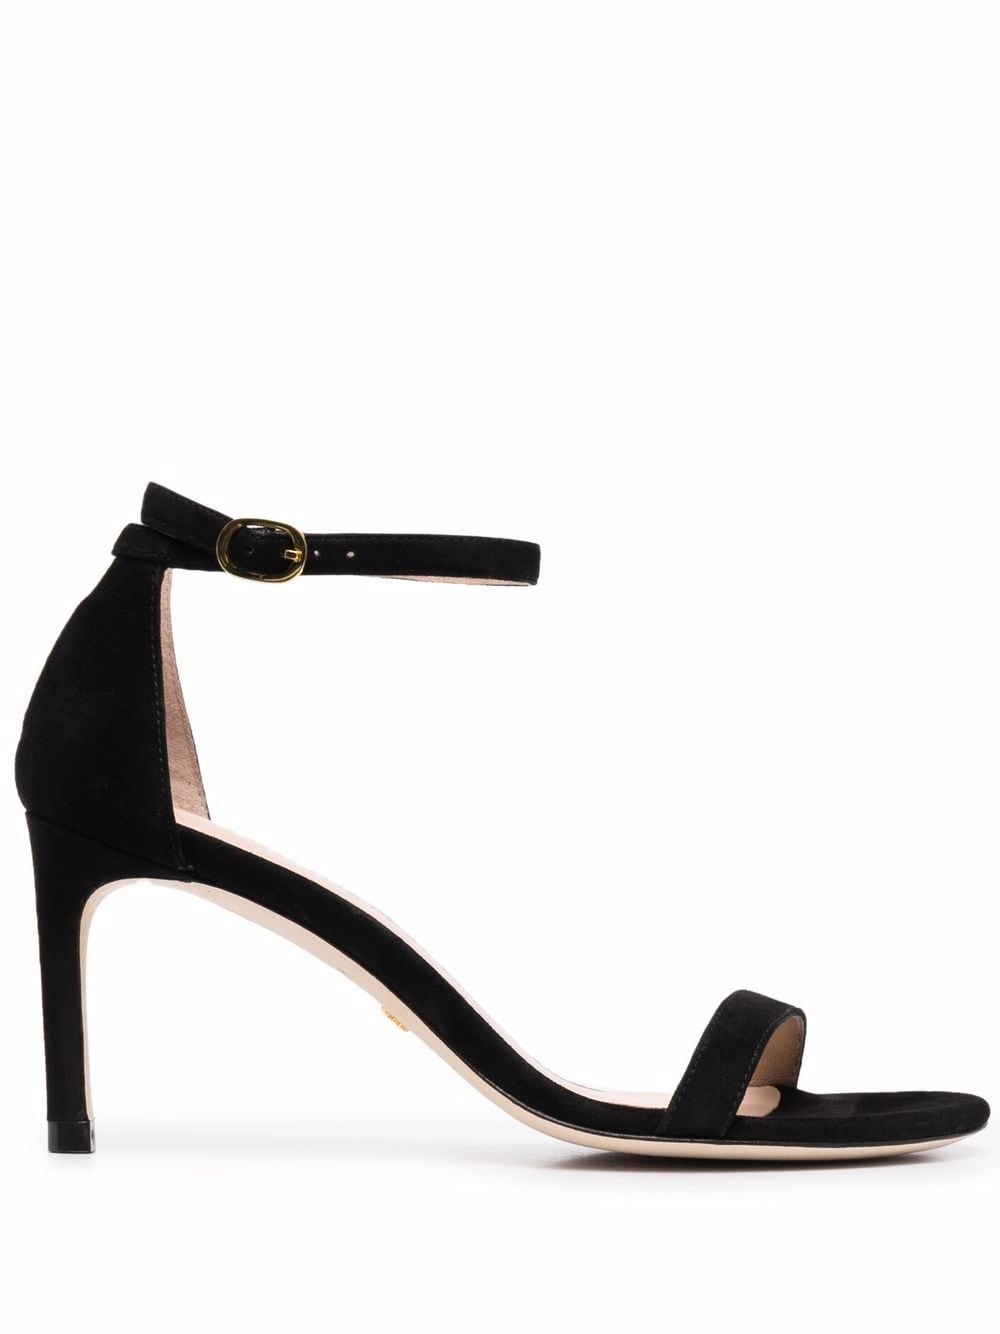 Nunaked 65mm patent leather sandals